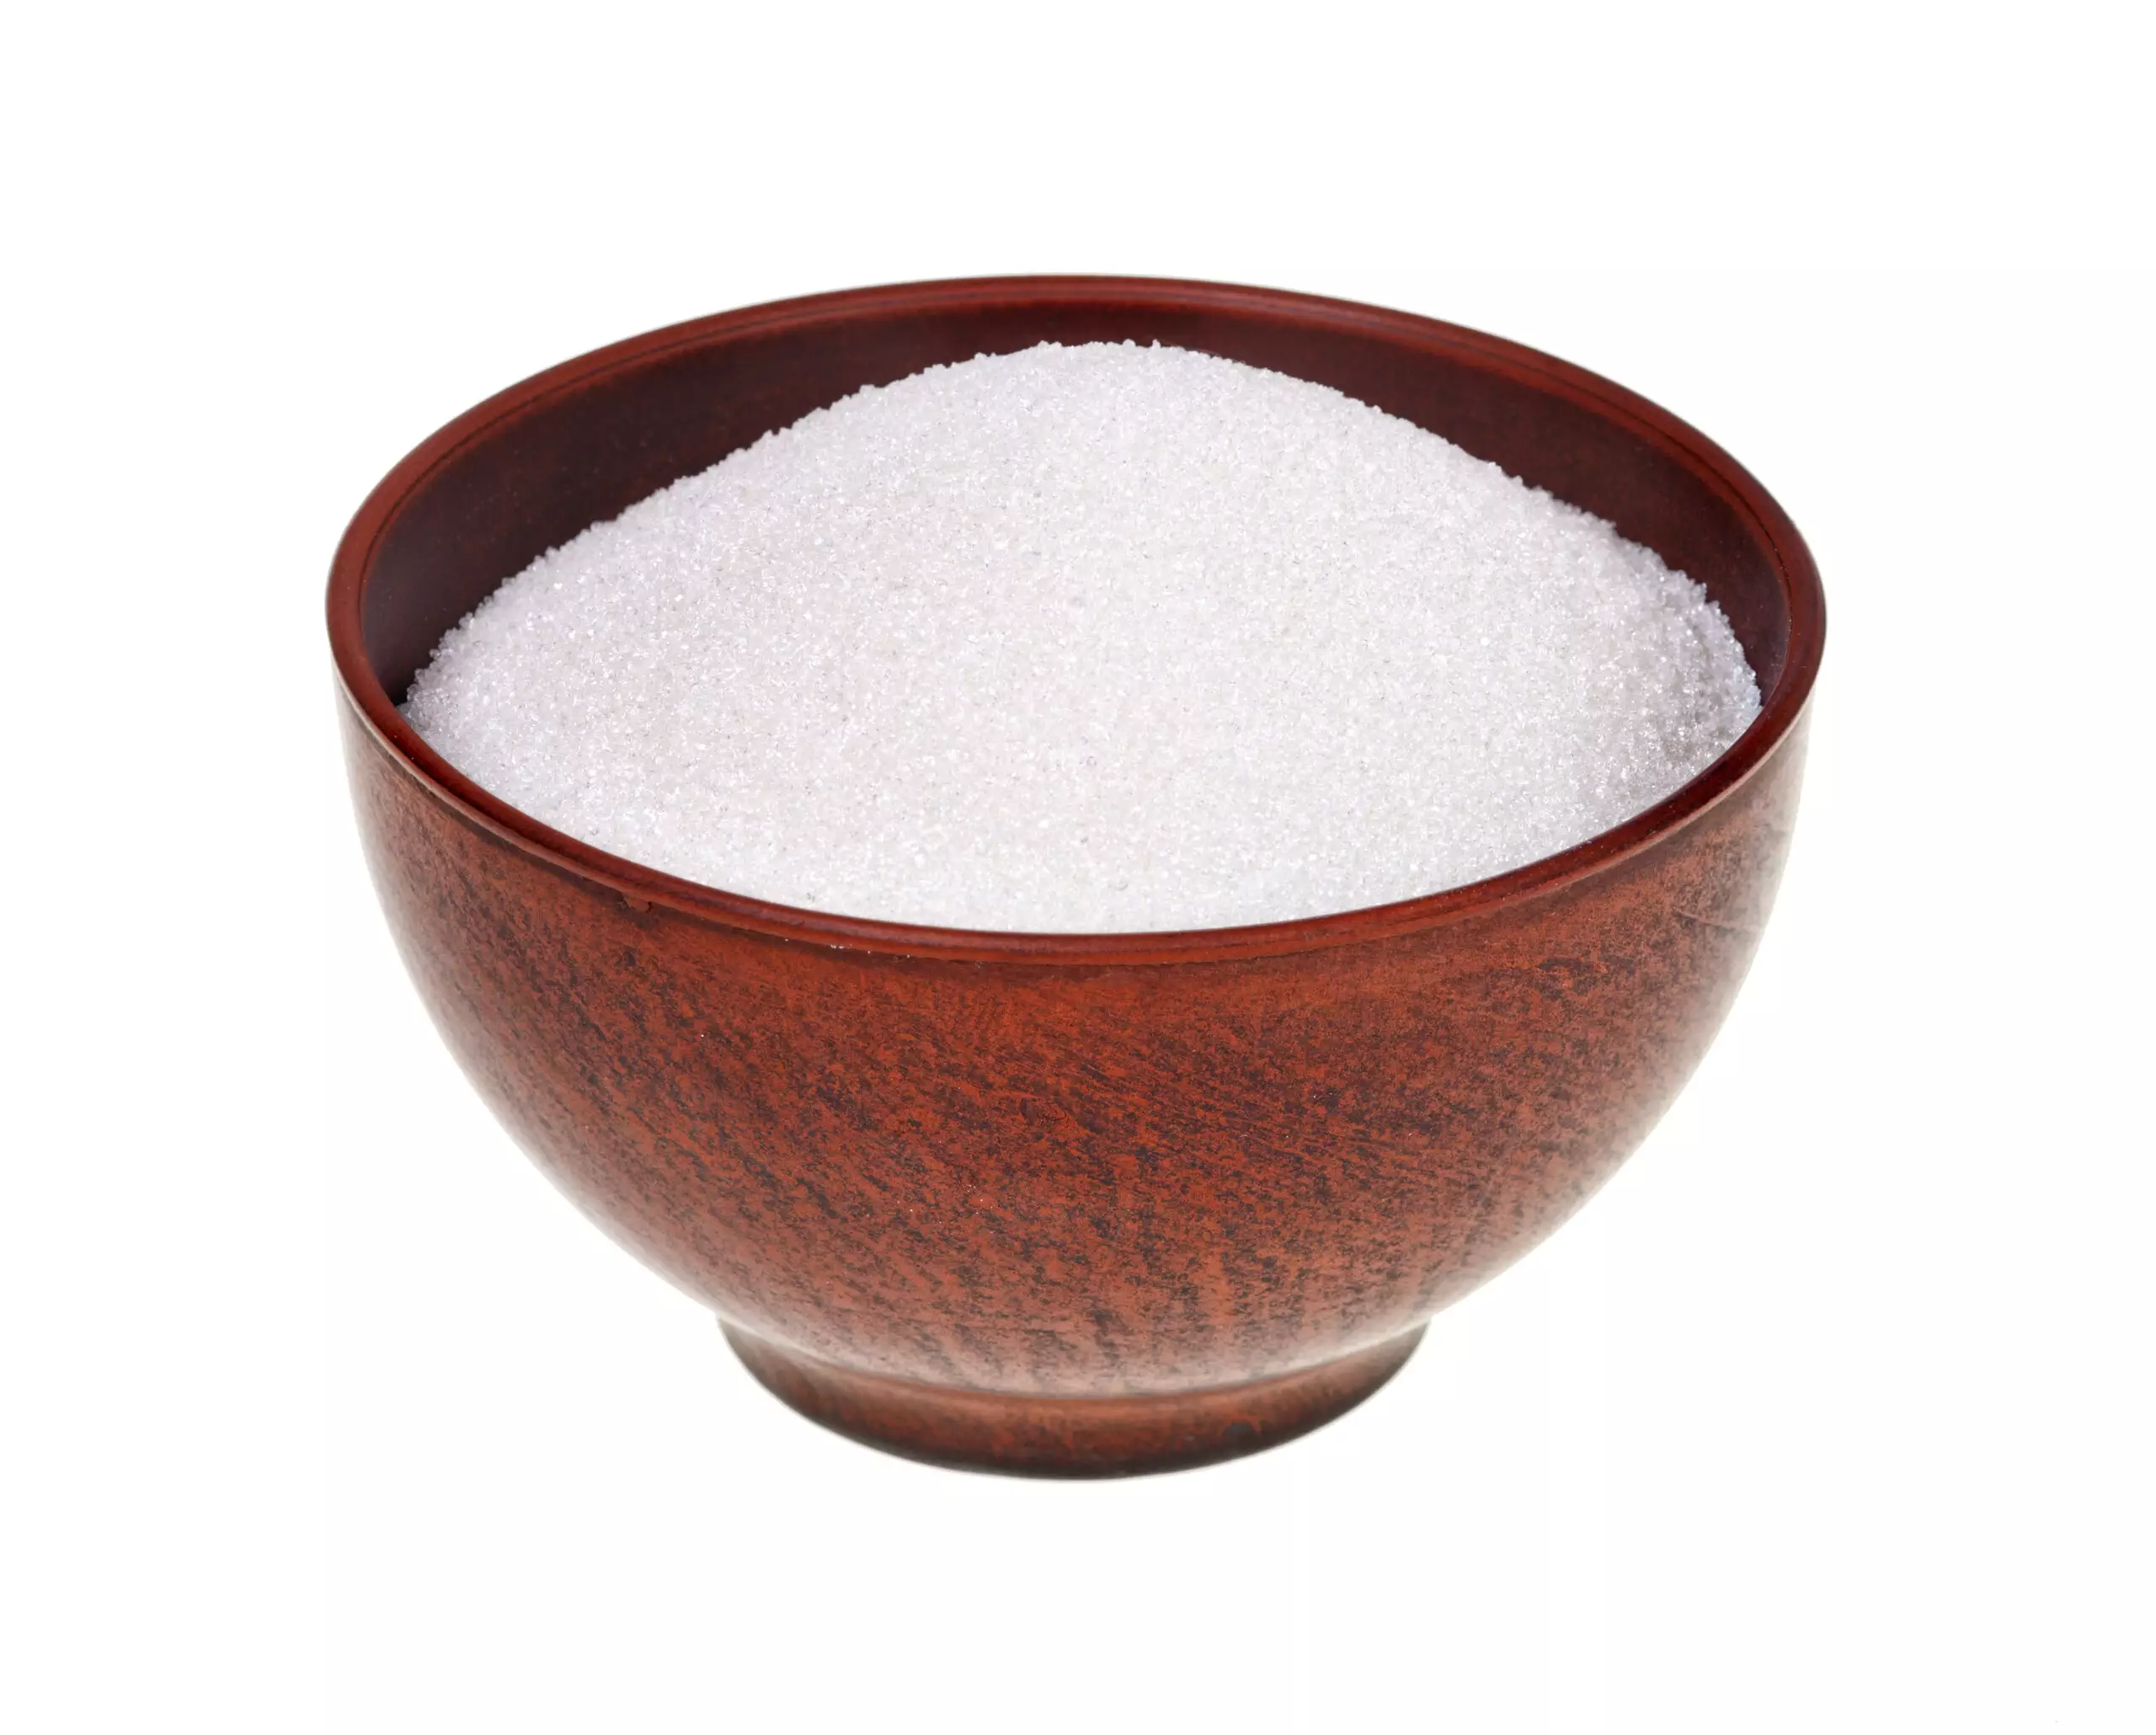 Brown bowl filled with white sugar.